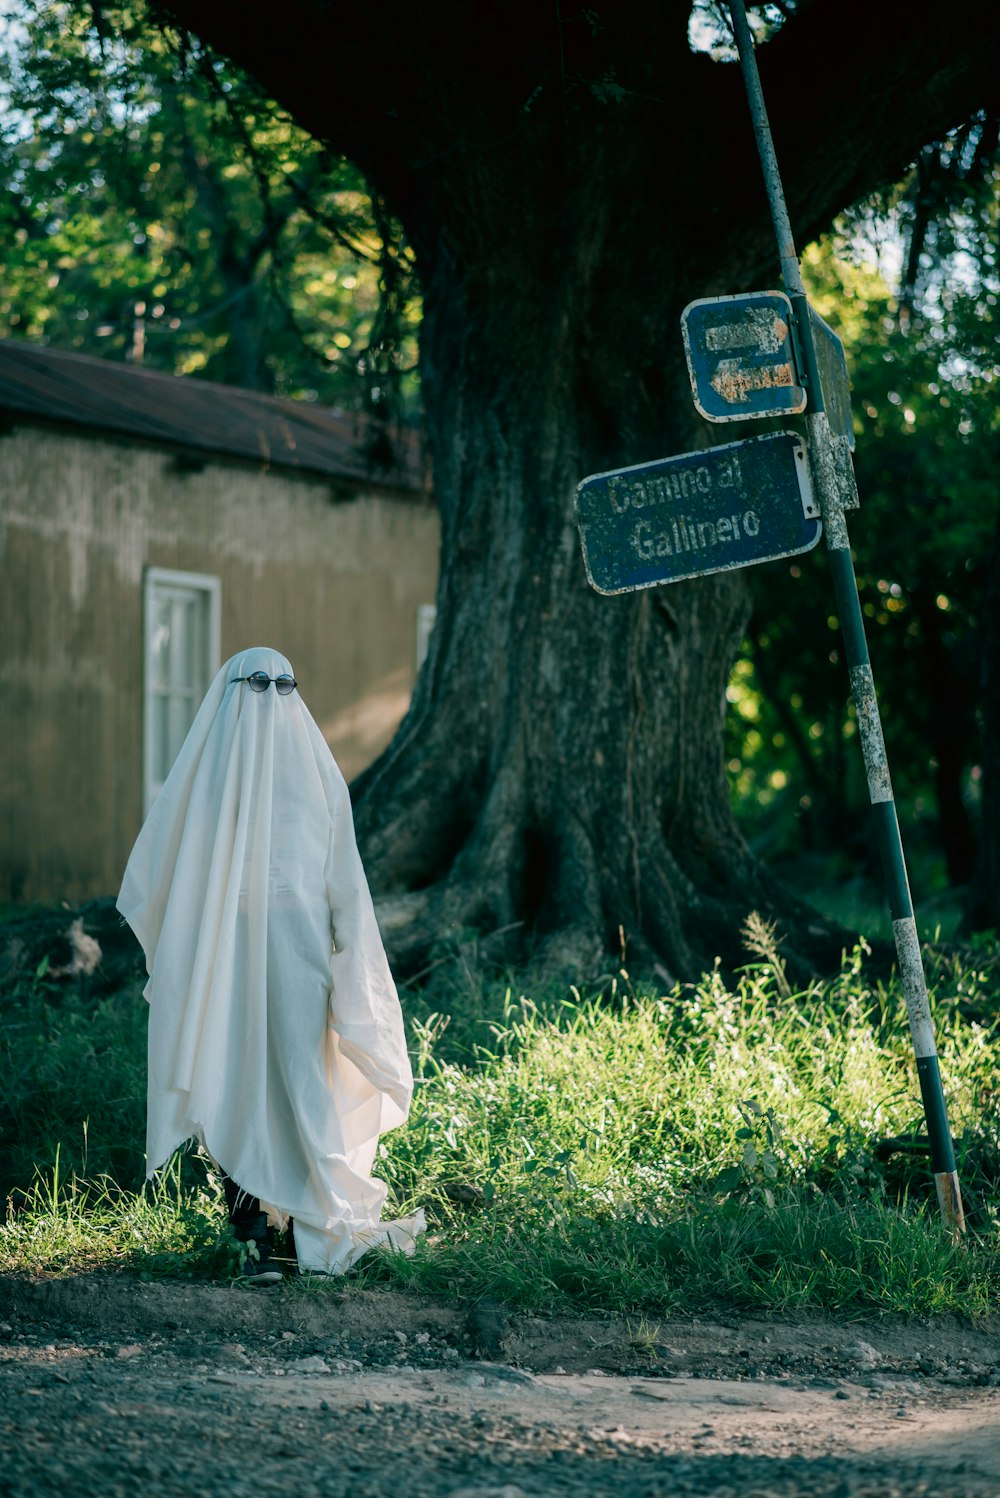 a person dressed in a ghost costume standing next to a street sign